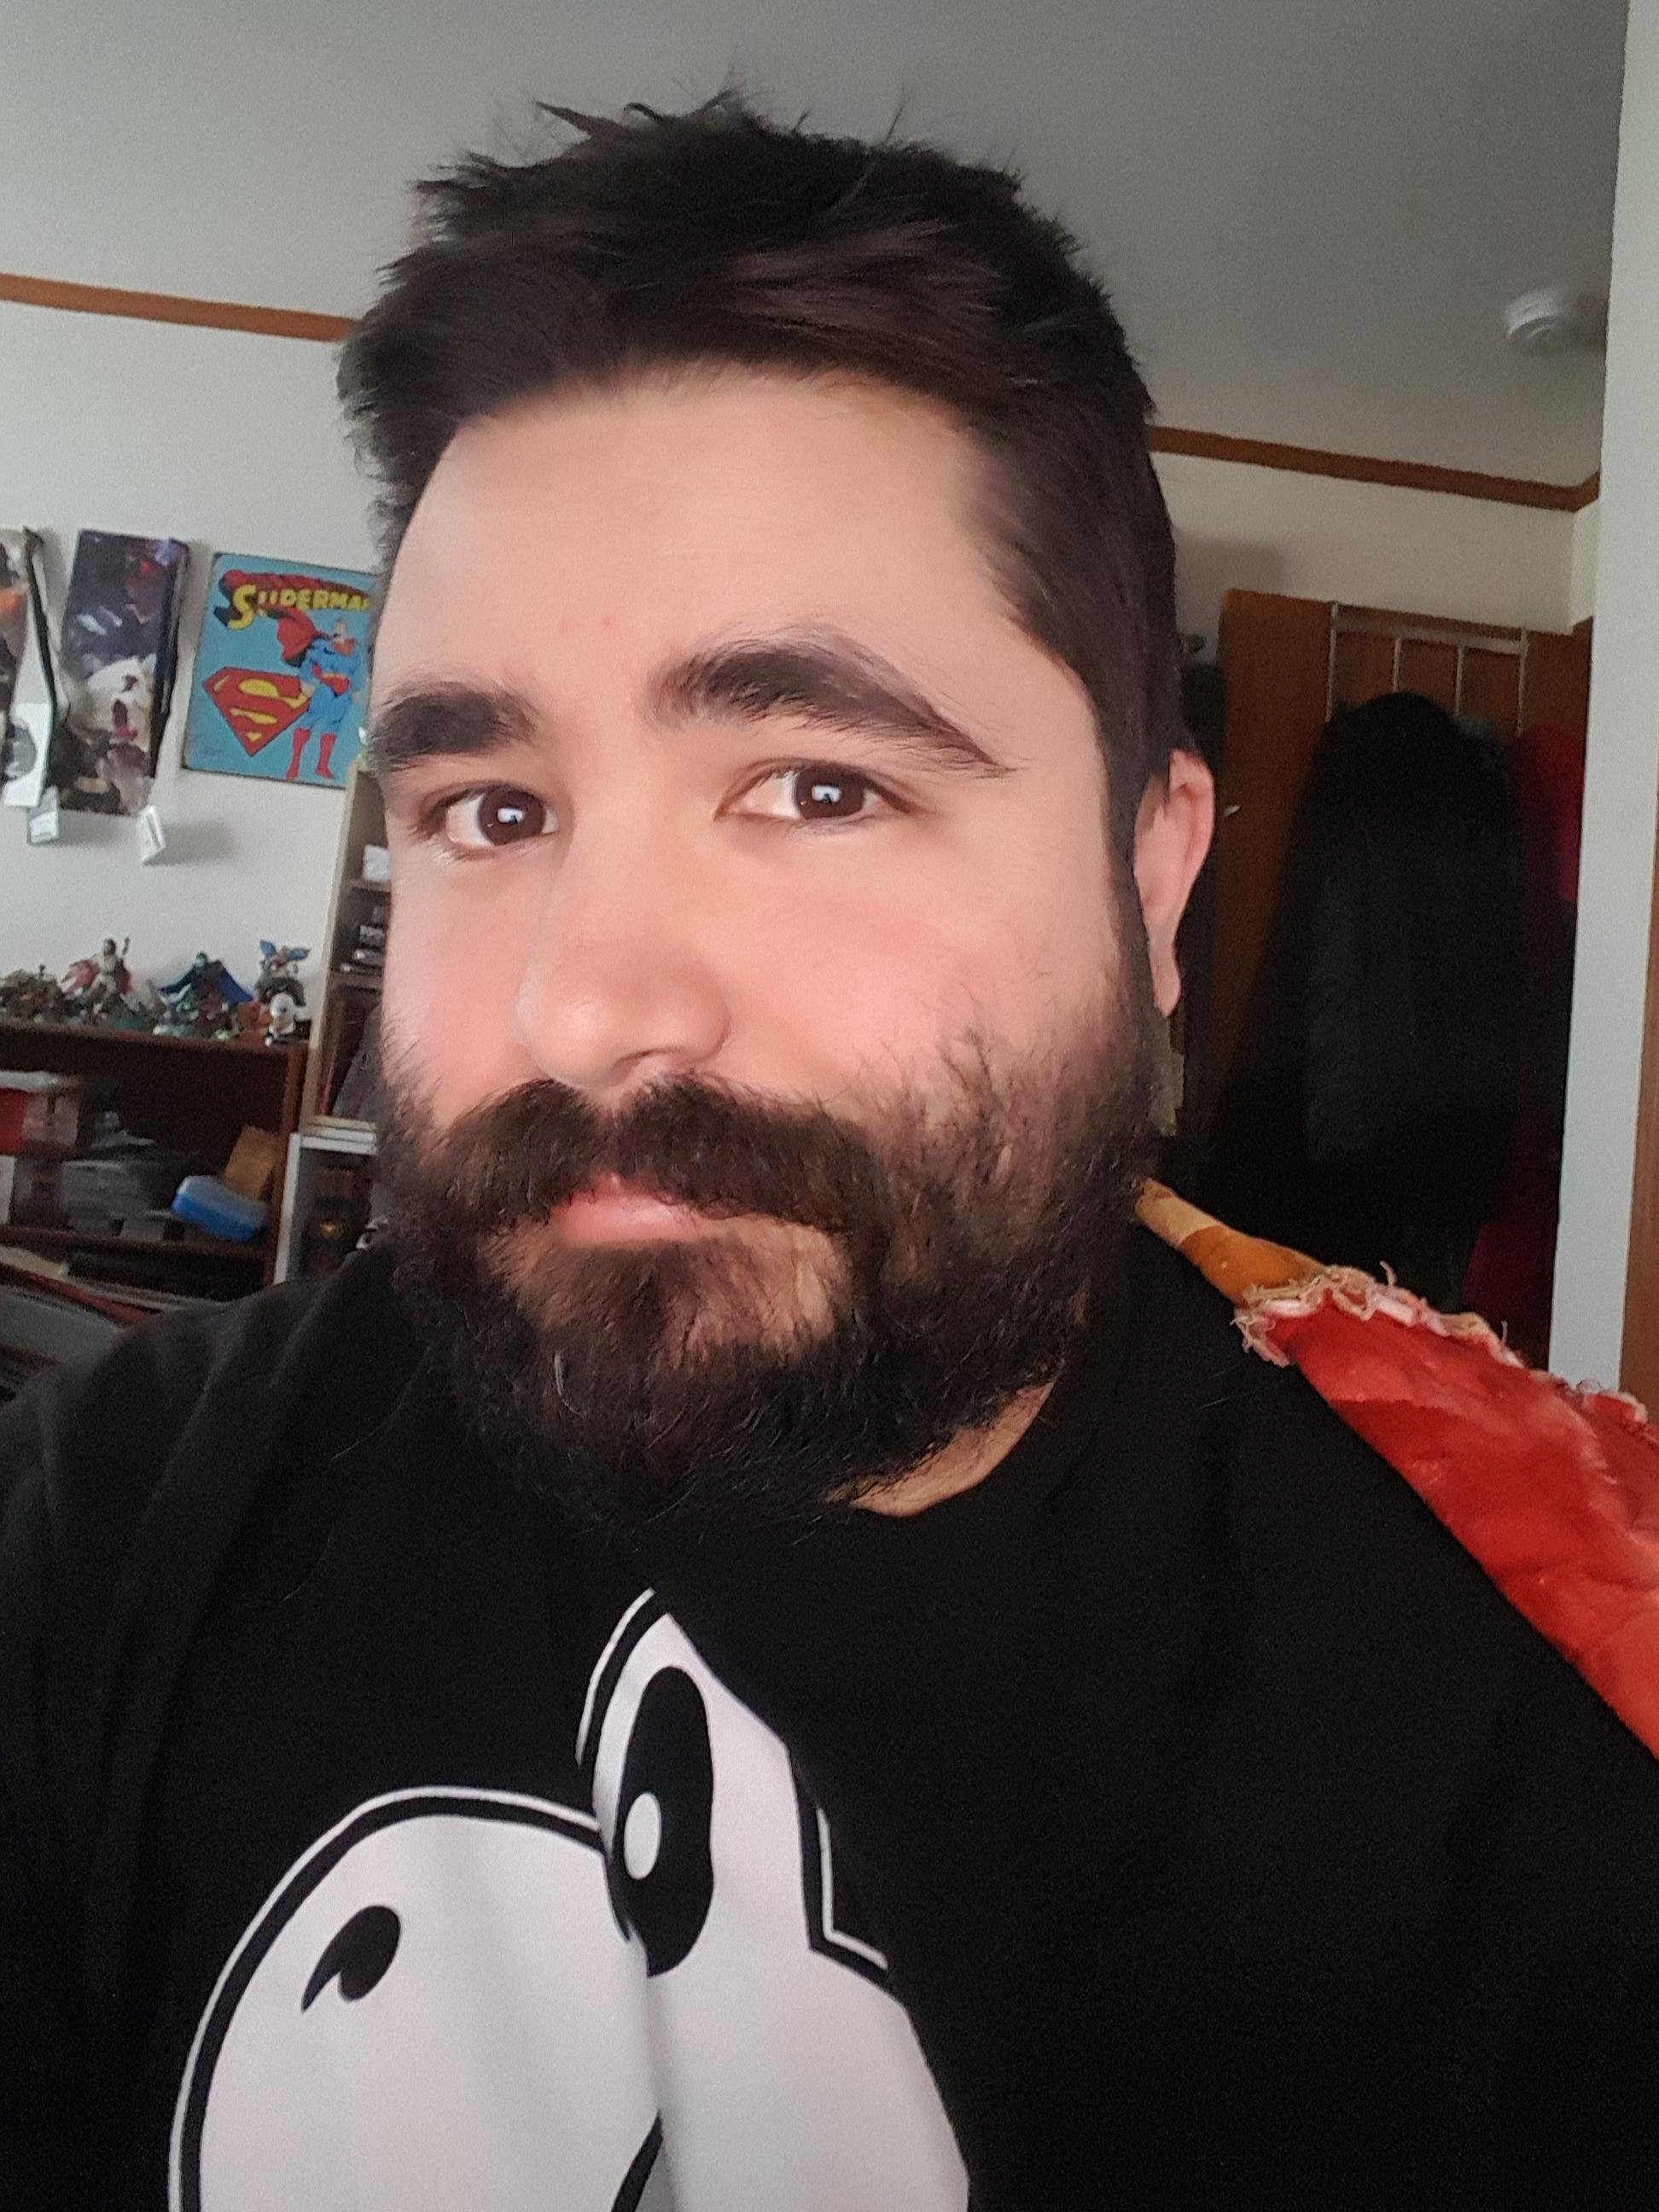 I was encouraged to post a pic of my beard progress. What do you think?